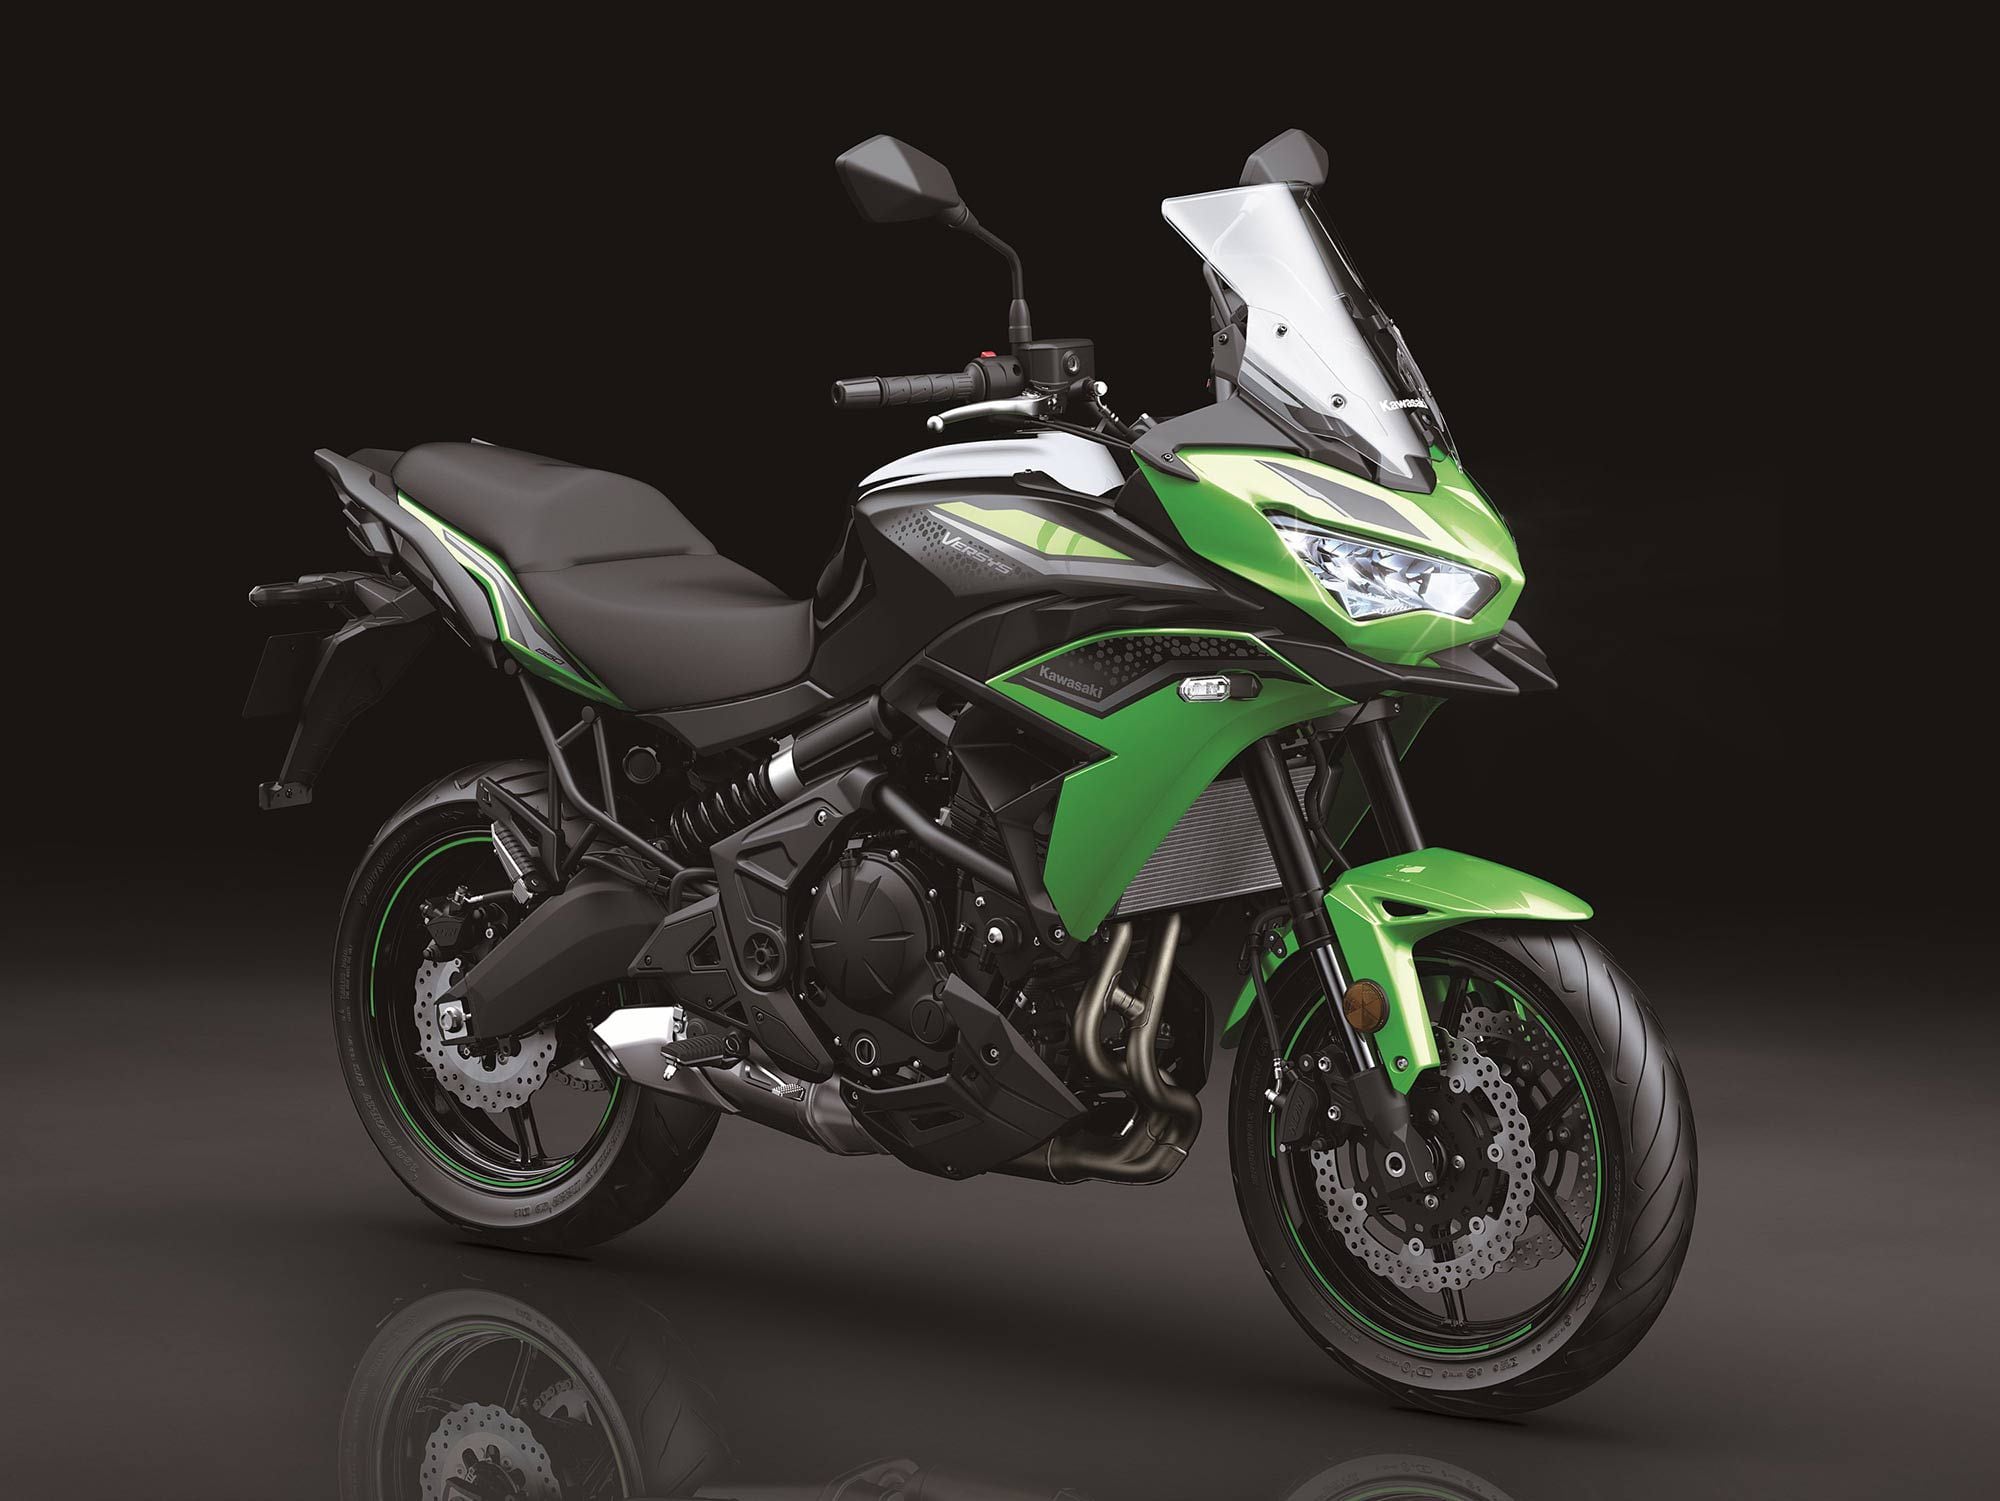 The Versys 650 also gets a revised look thanks to streamlined bodywork inspired by the Versys 1000.